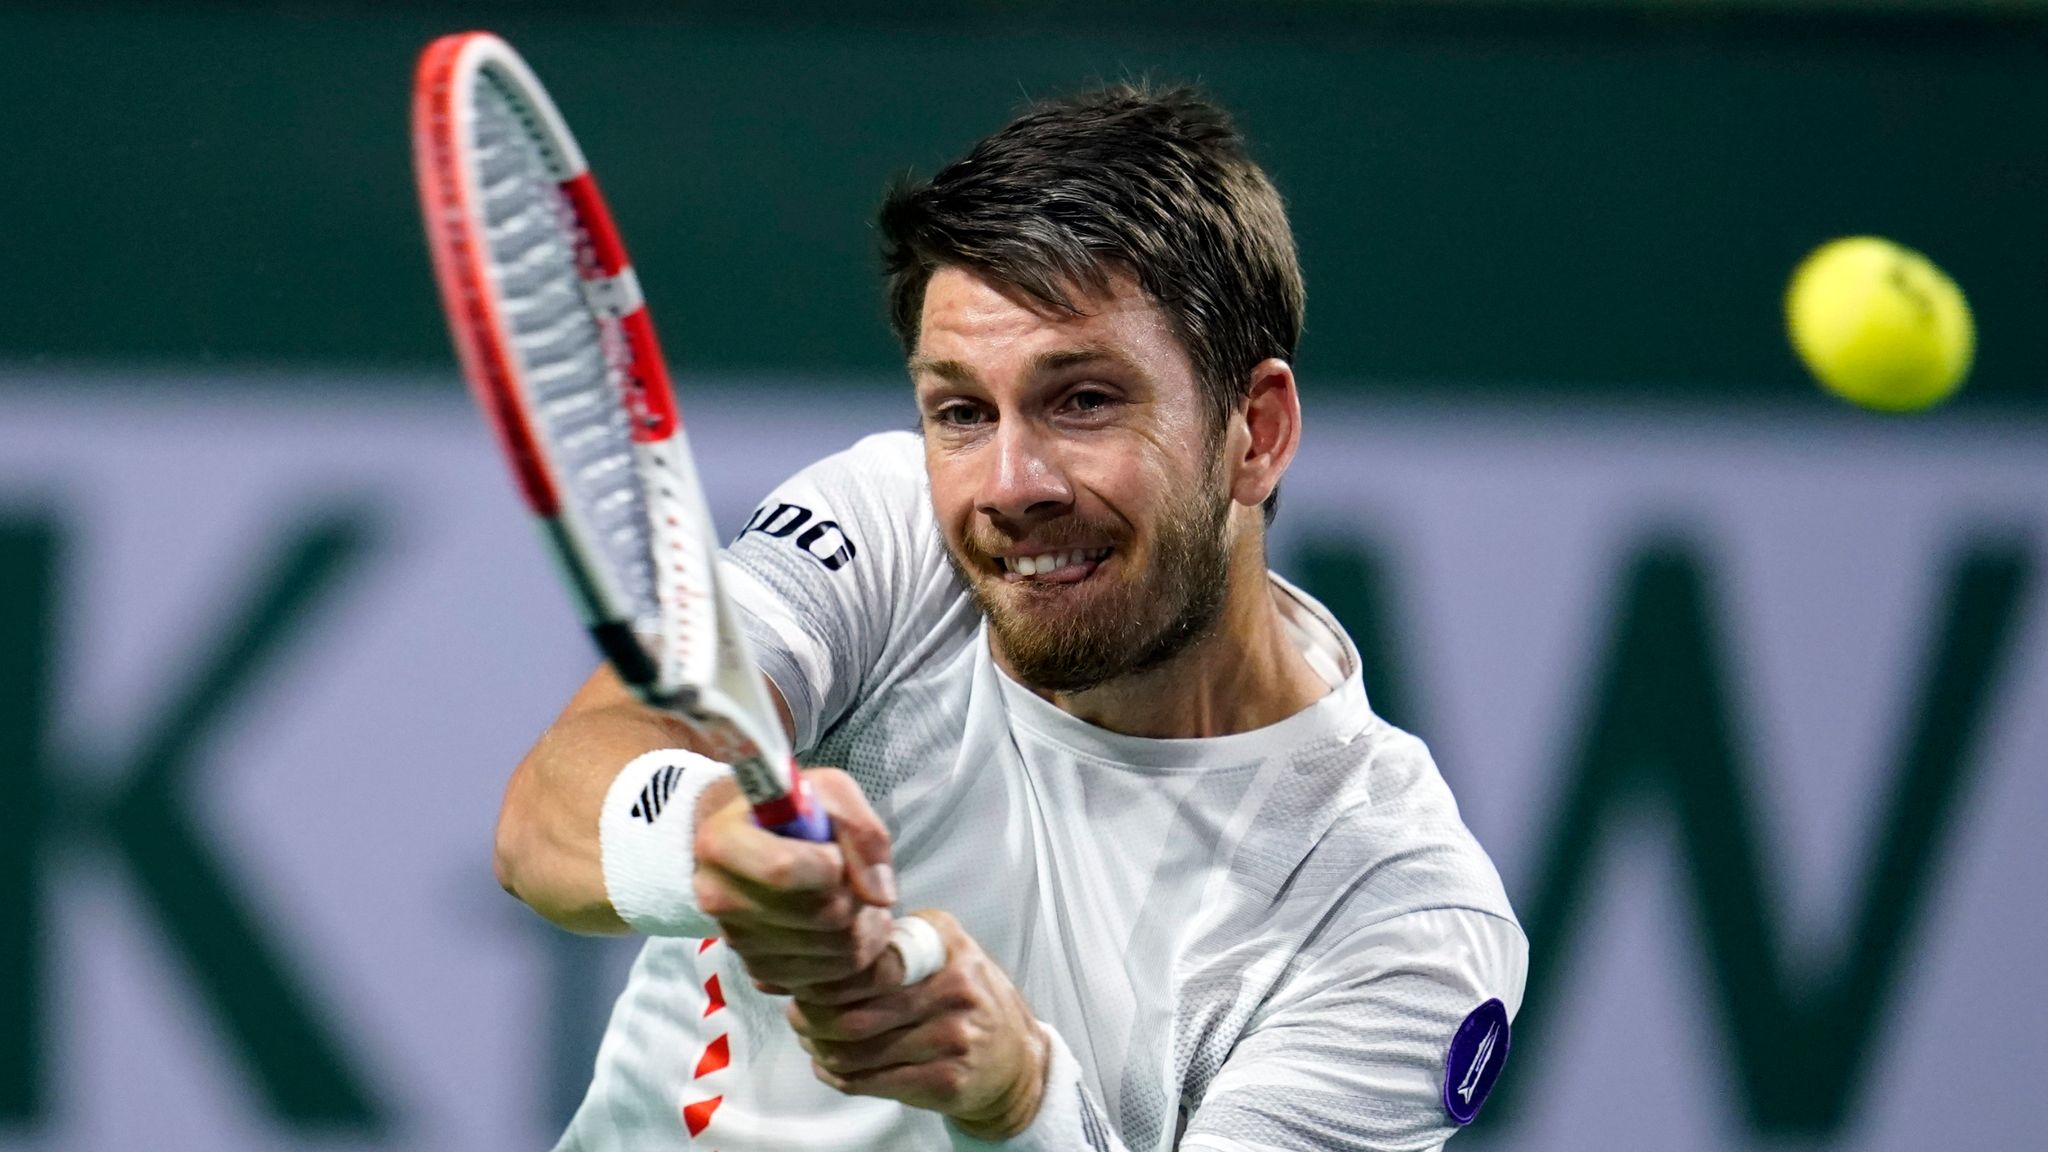 Indian Wells Cameron Norrie defeats Nikoloz Basilashvili to reach fourth round and continue title defence Tennis News Sky Sports